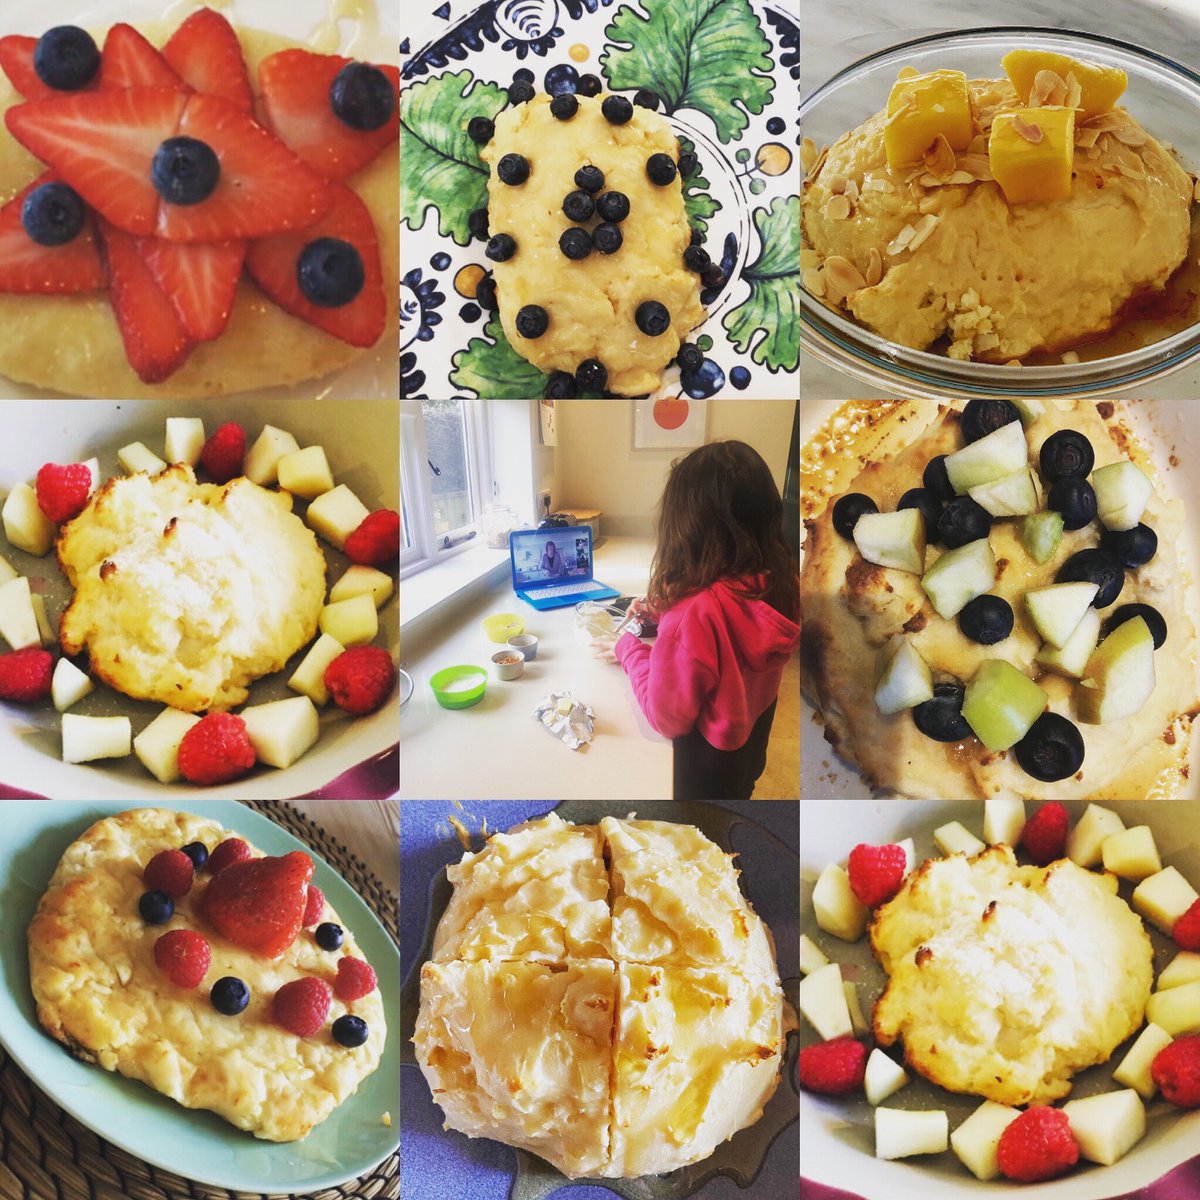 It’s The Roman Bake Off!
 
As part of the pupil’s Latin lesson this week, Years 5 to 8 made ‘Libum’ an ancient Roman version of cheesecake.
 
They all look so amazing but who will get The Miss Hordle Handshake?
 
#daneshillprepschool #bakeoff #romancheesecake #latin